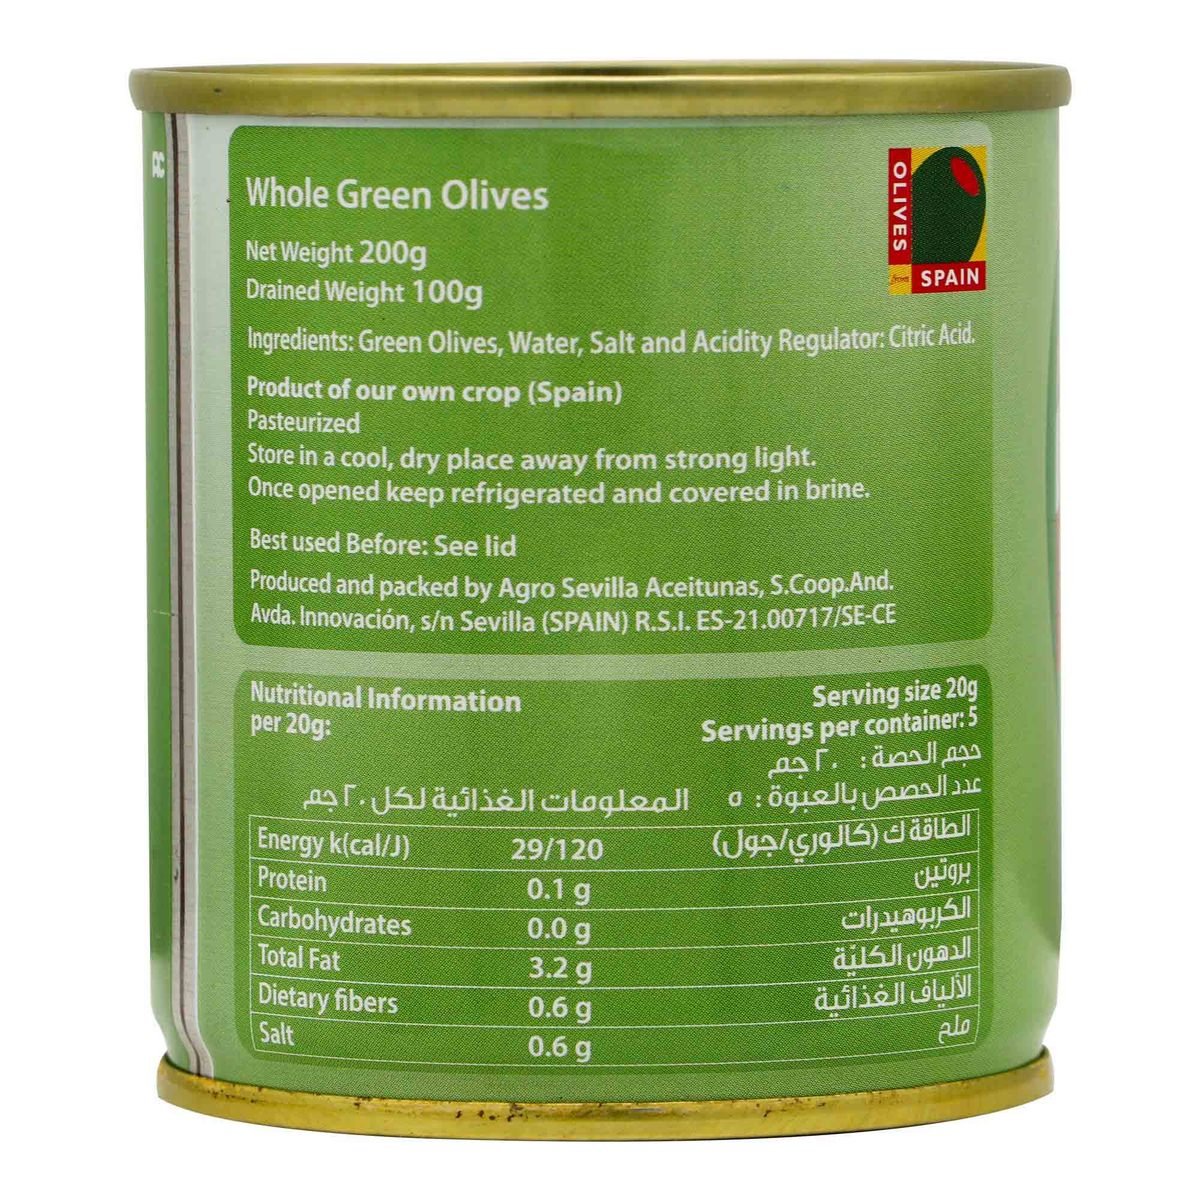 Coopoliva Whole Green Olives 200g